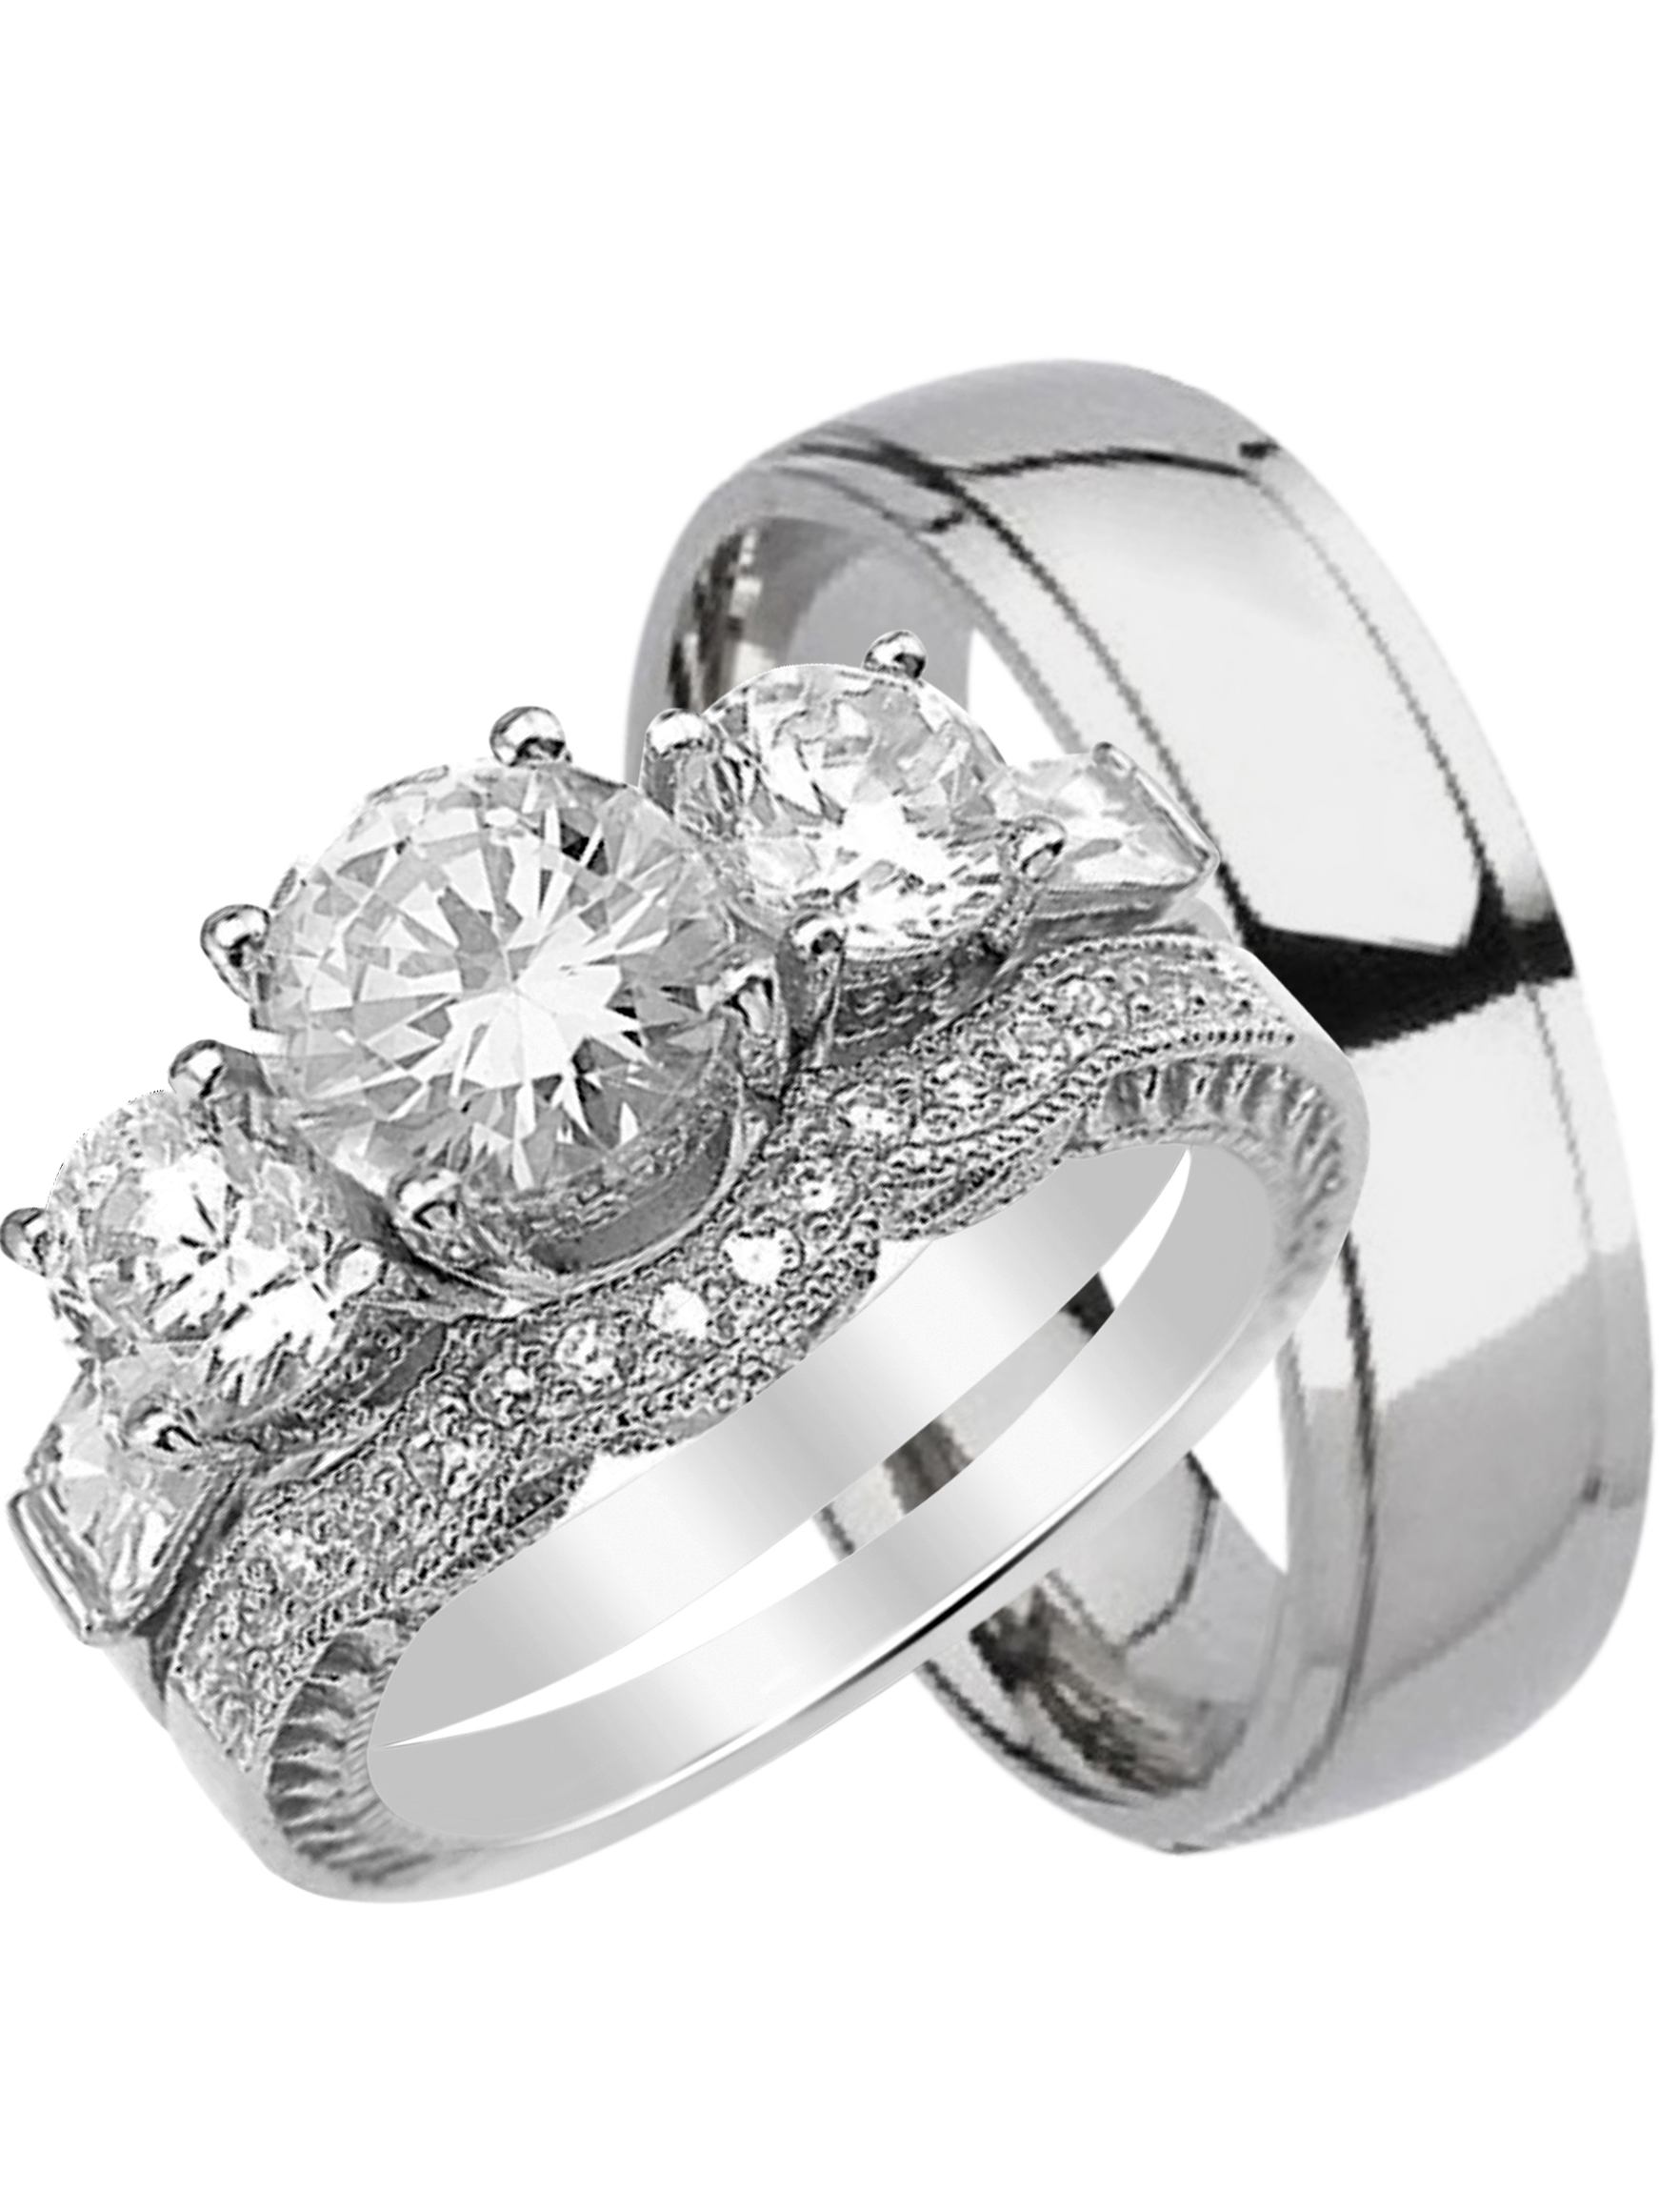 His and hers trio wedding ring set newegg laptop deals